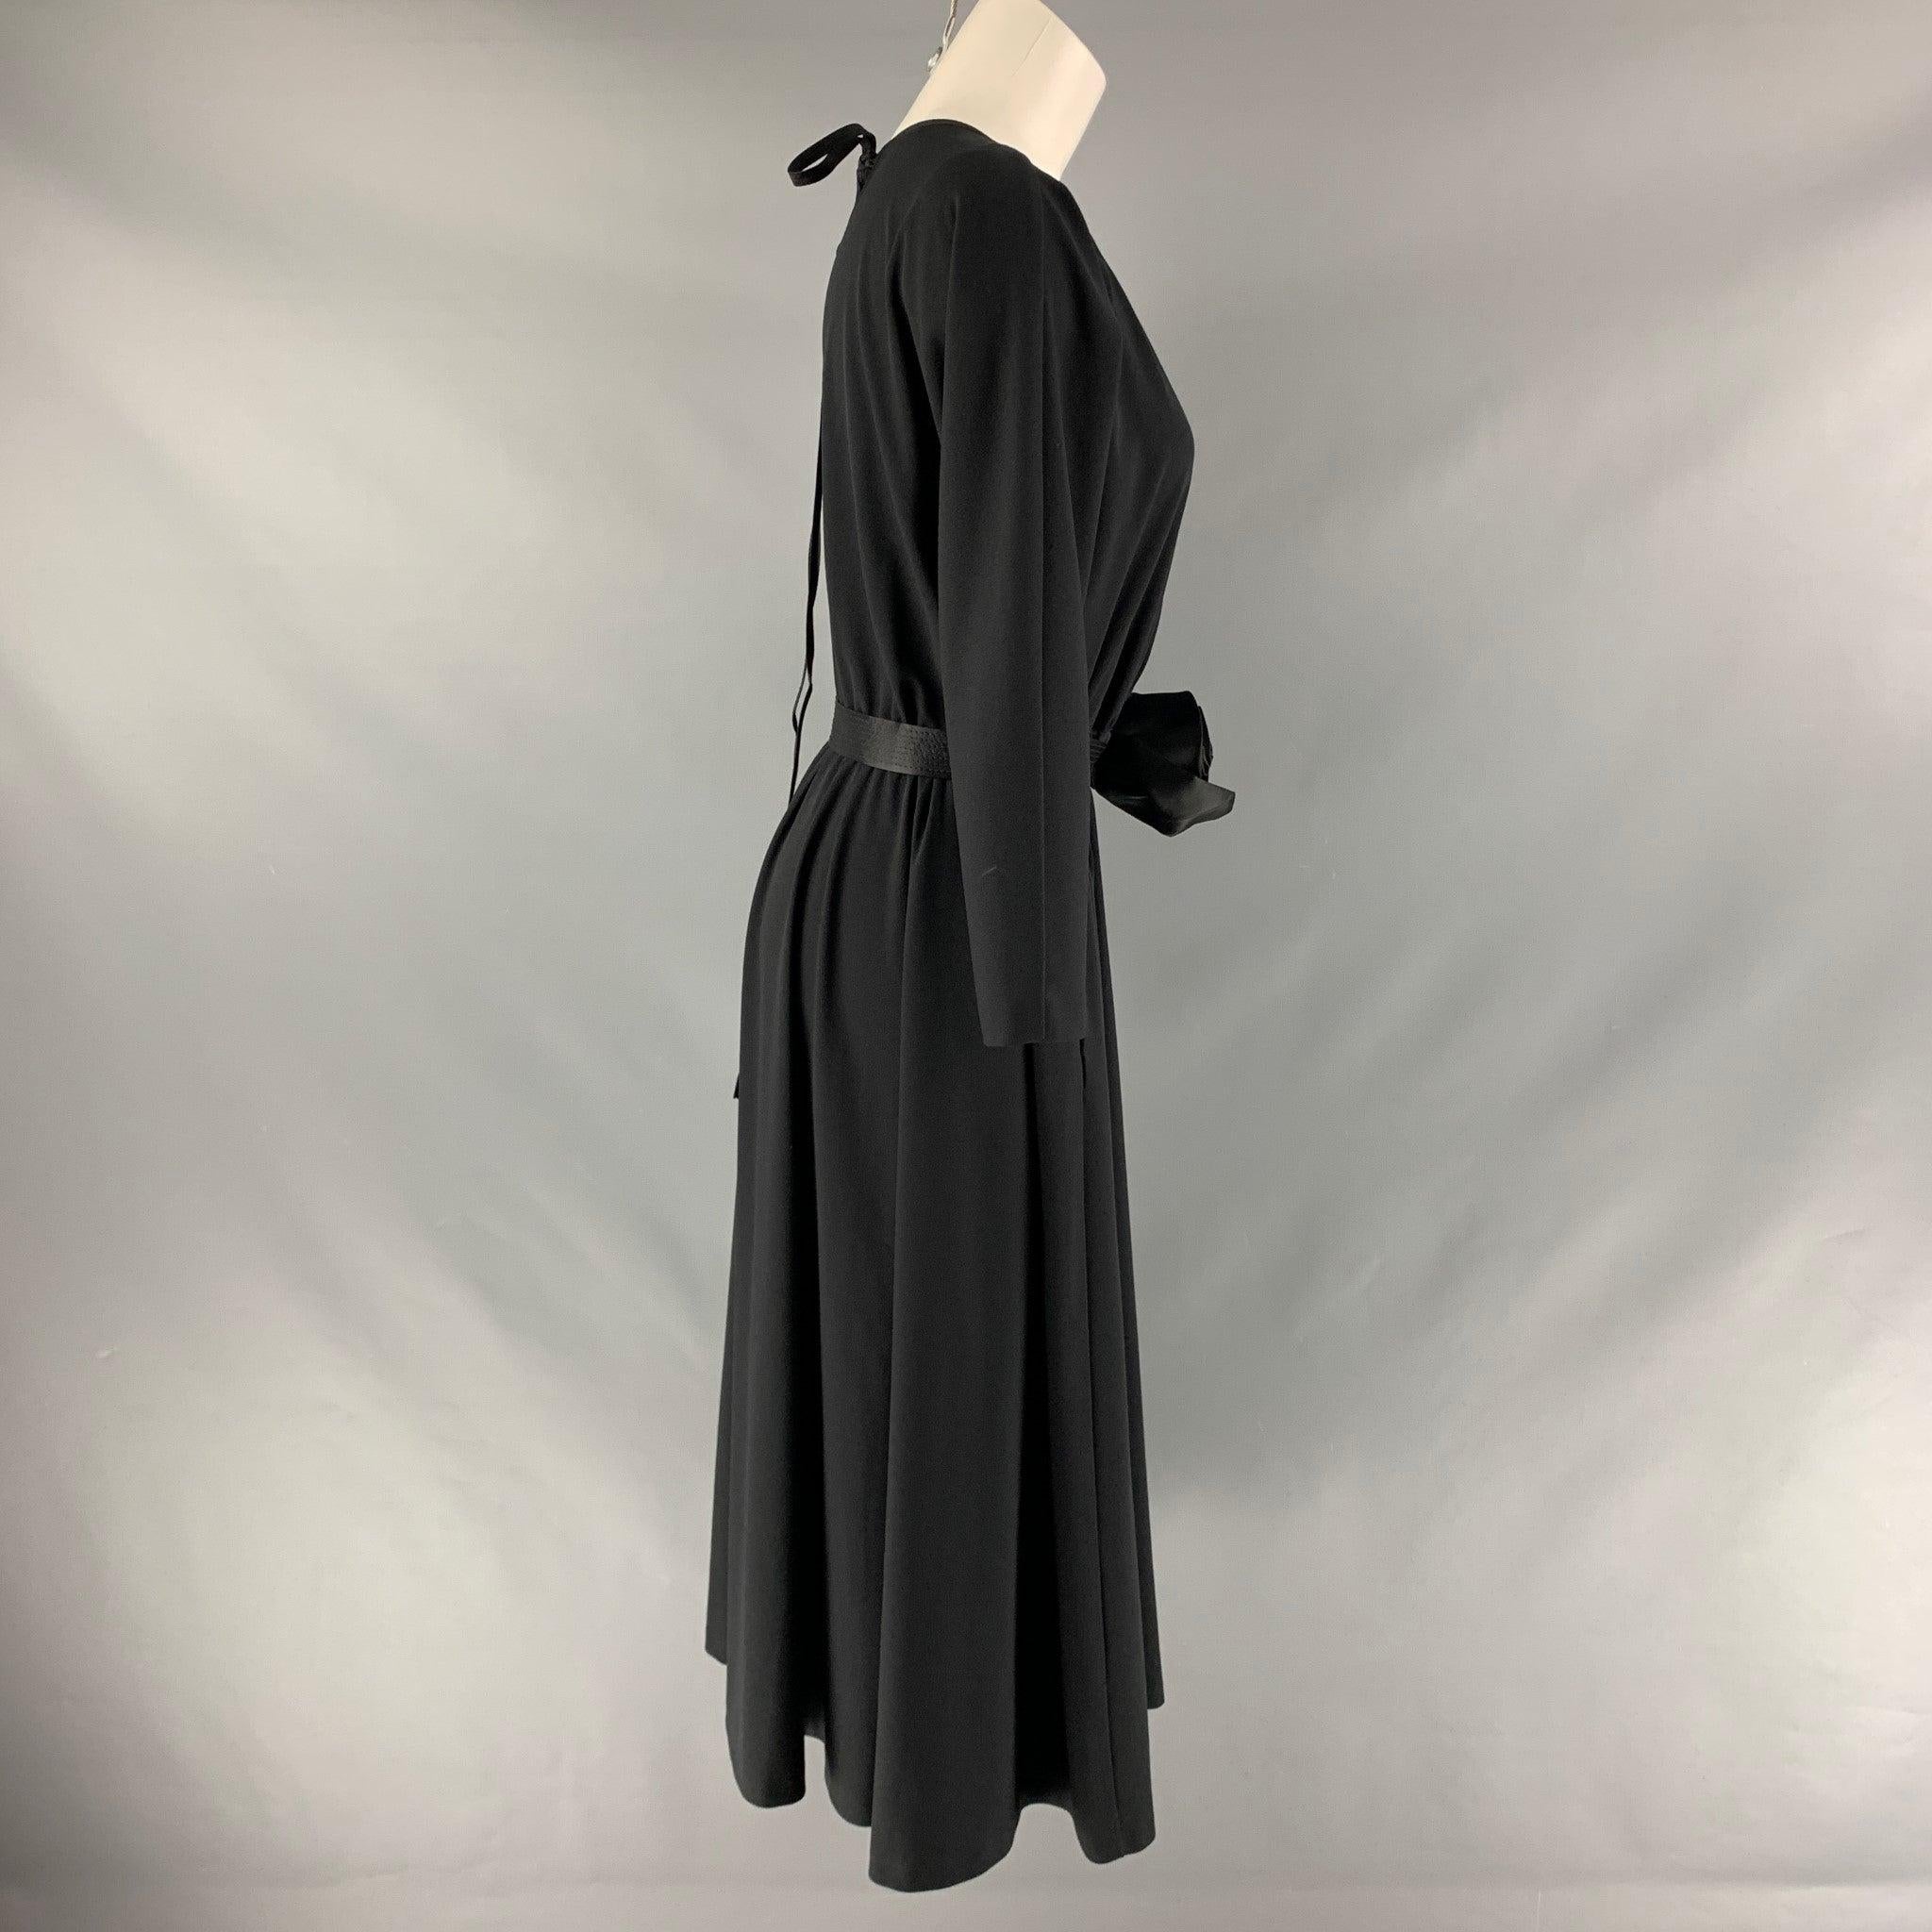 MARC JACOBS RUNWAY long sleeve dress comes in a black polyester fabric featuring a v-neck, elastic waistband, and black belt.New with Tags
 

Marked:   4. 

Measurements: 
 
Shoulder: 14 inches Bust: 32 inches Waist: 27 inches Hip: 33 inches Sleeve: